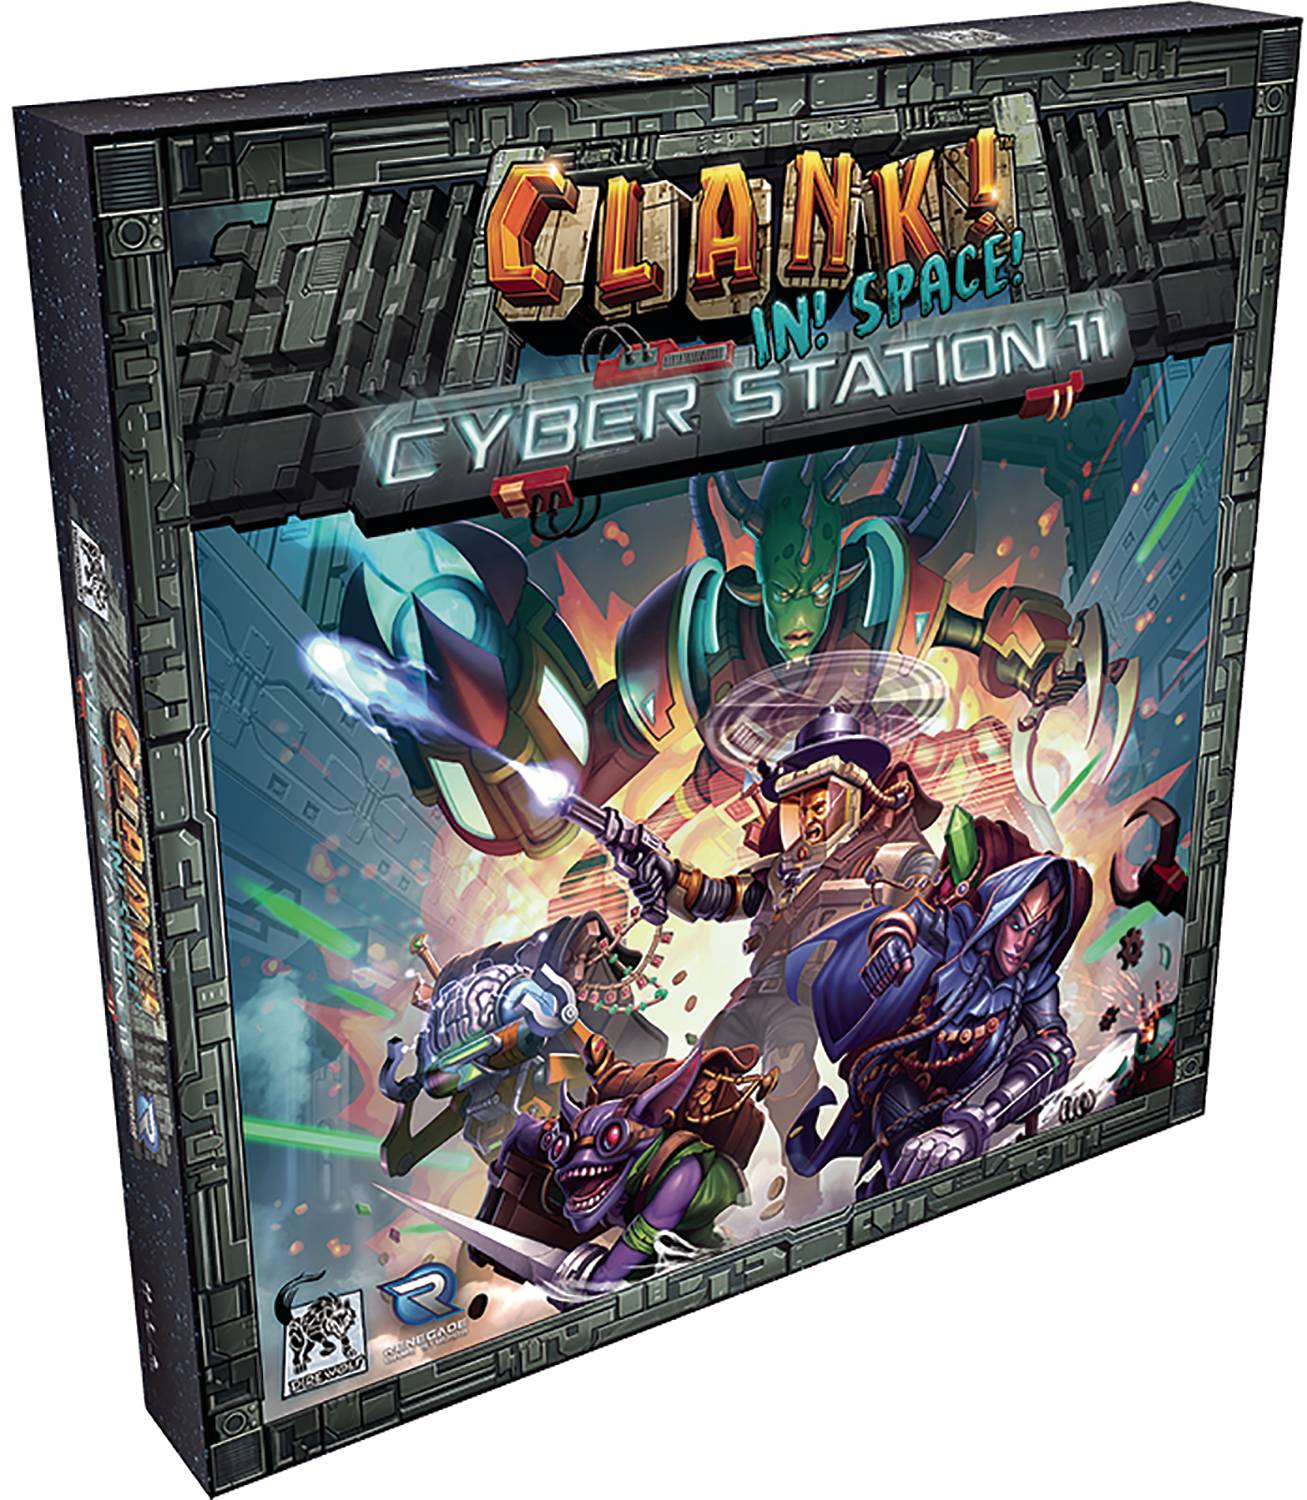 Clank In Space Cyber Station 11 Expansion